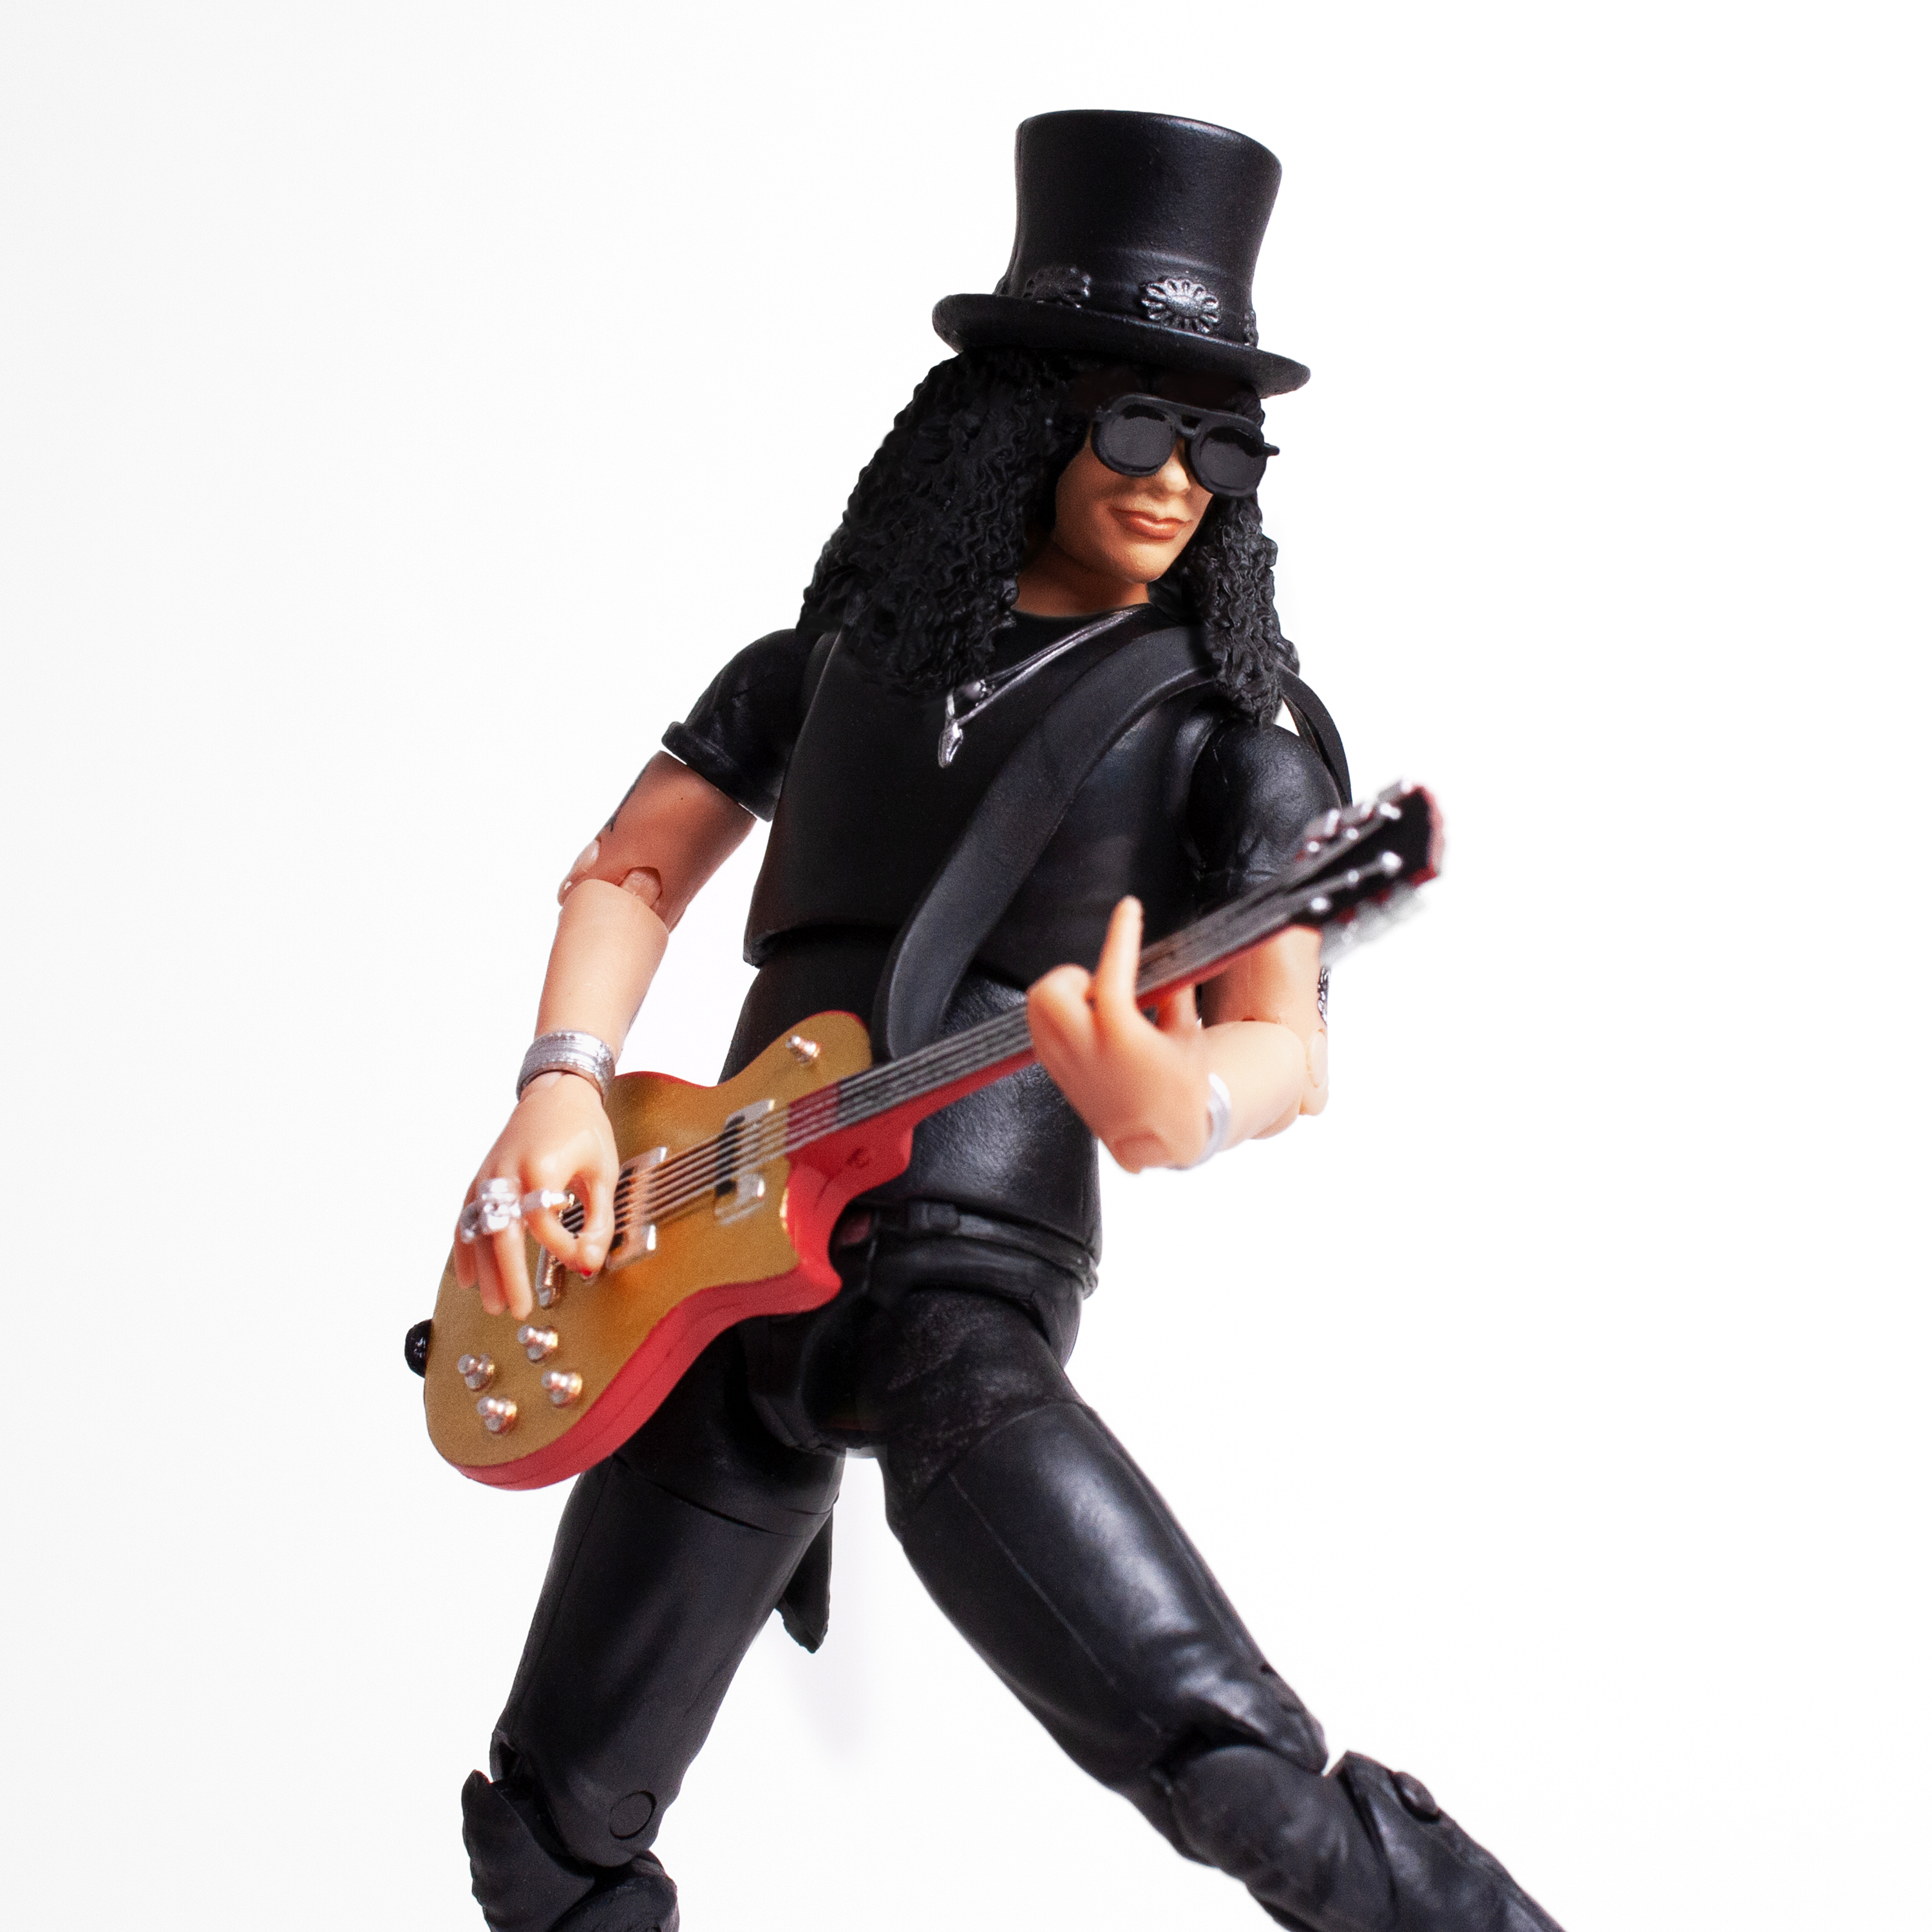 Guns N Roses Slash - The Loyal Subjects BST AXN 5" Action Figure - image 4 of 5